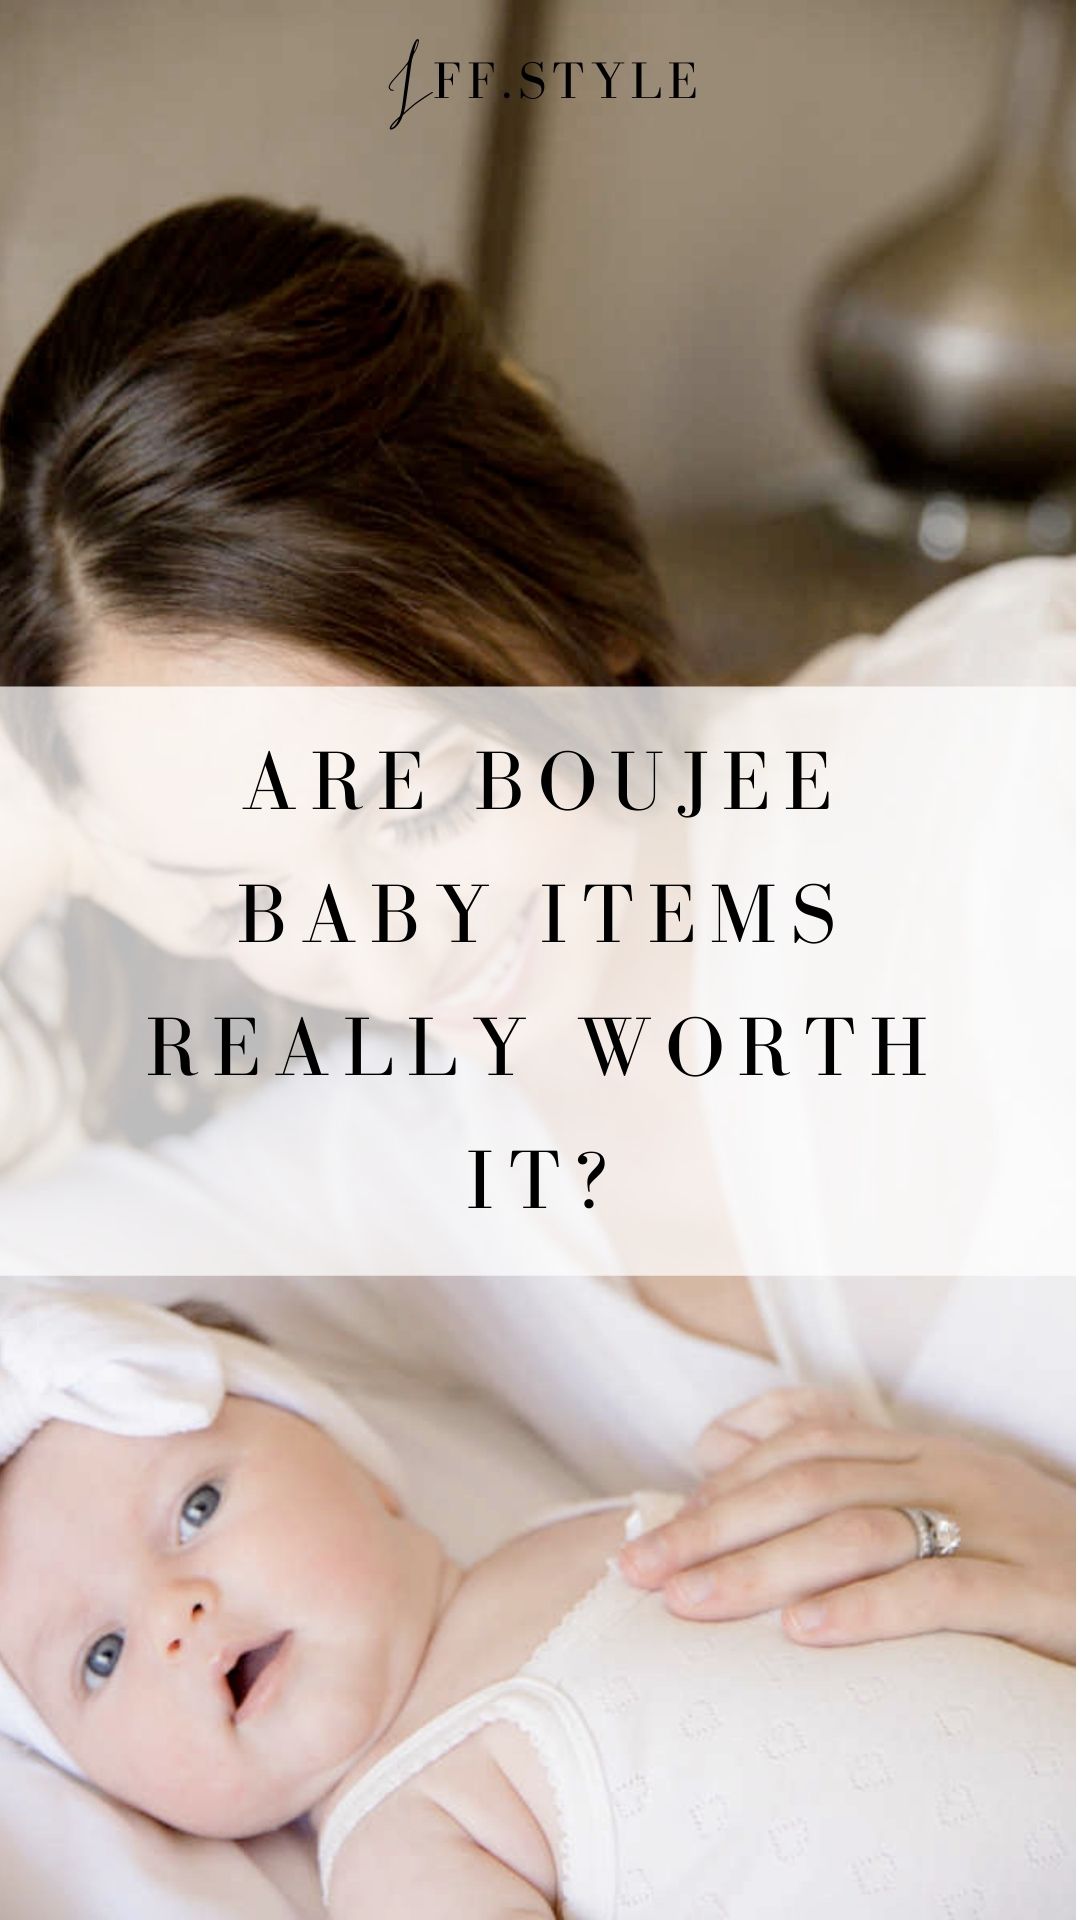 Pinterest Pin- Are boujee baby items really worth it?